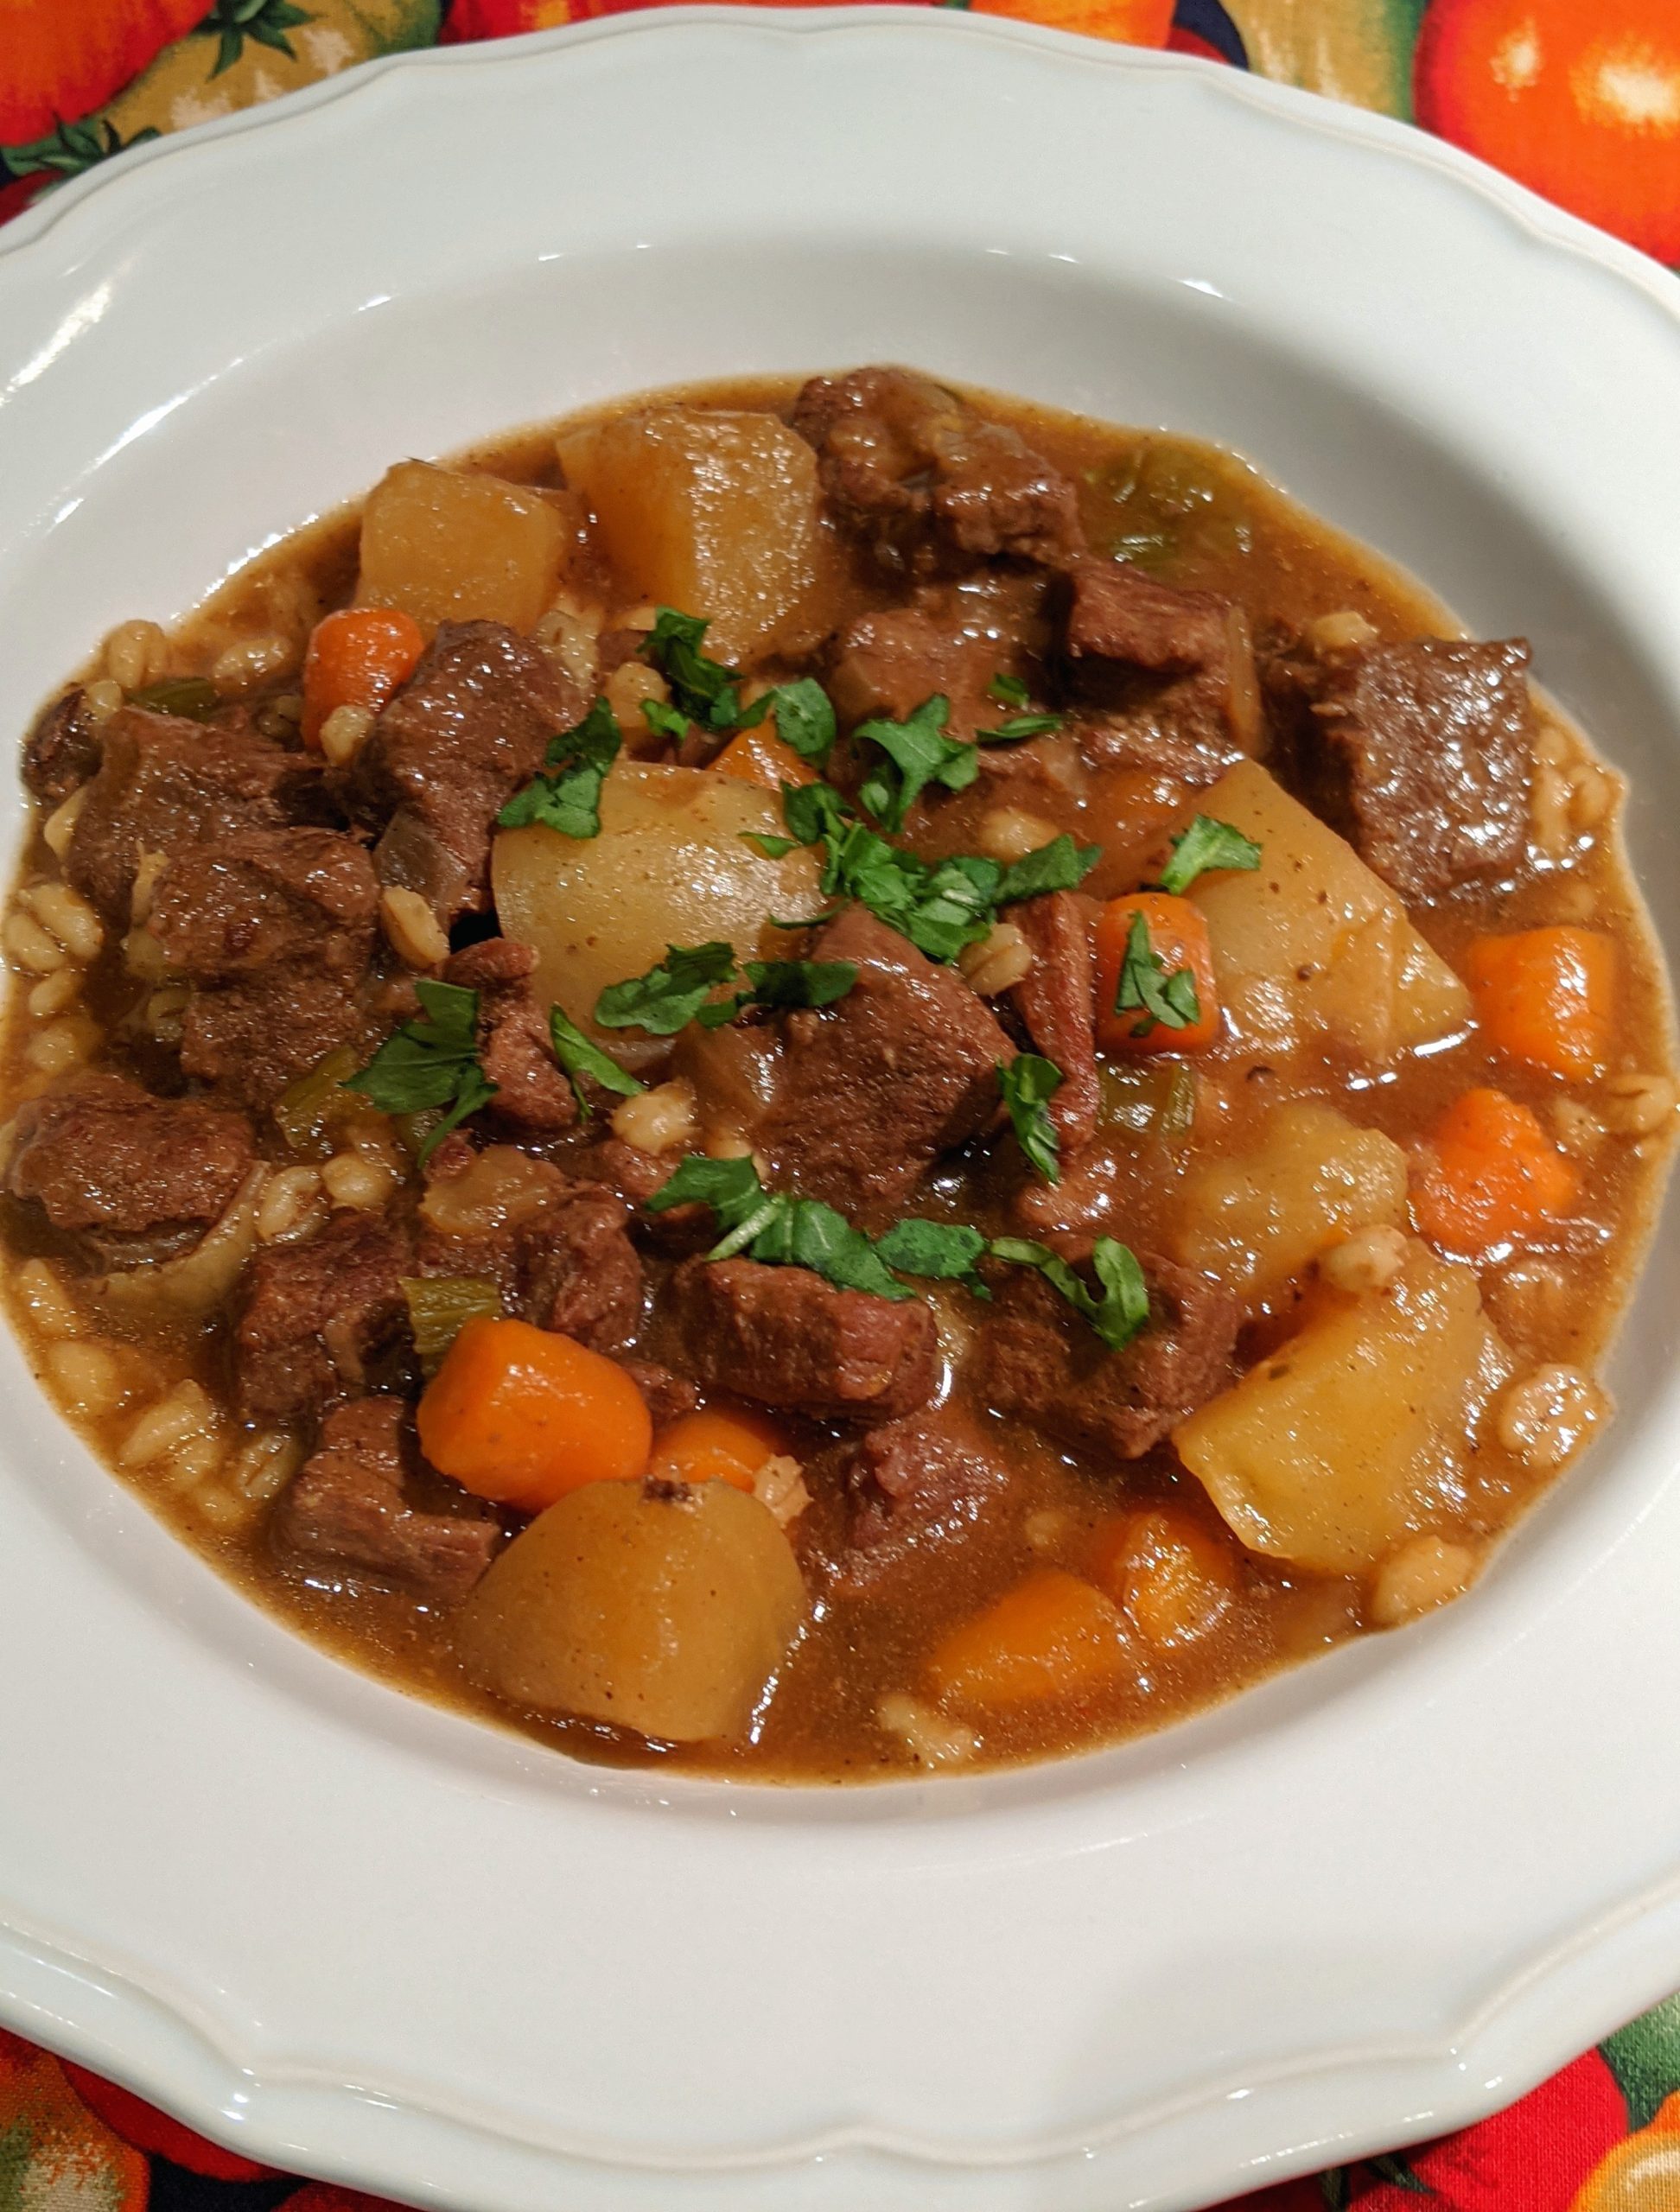 How to Make an Old-Fashioned Beef Stew